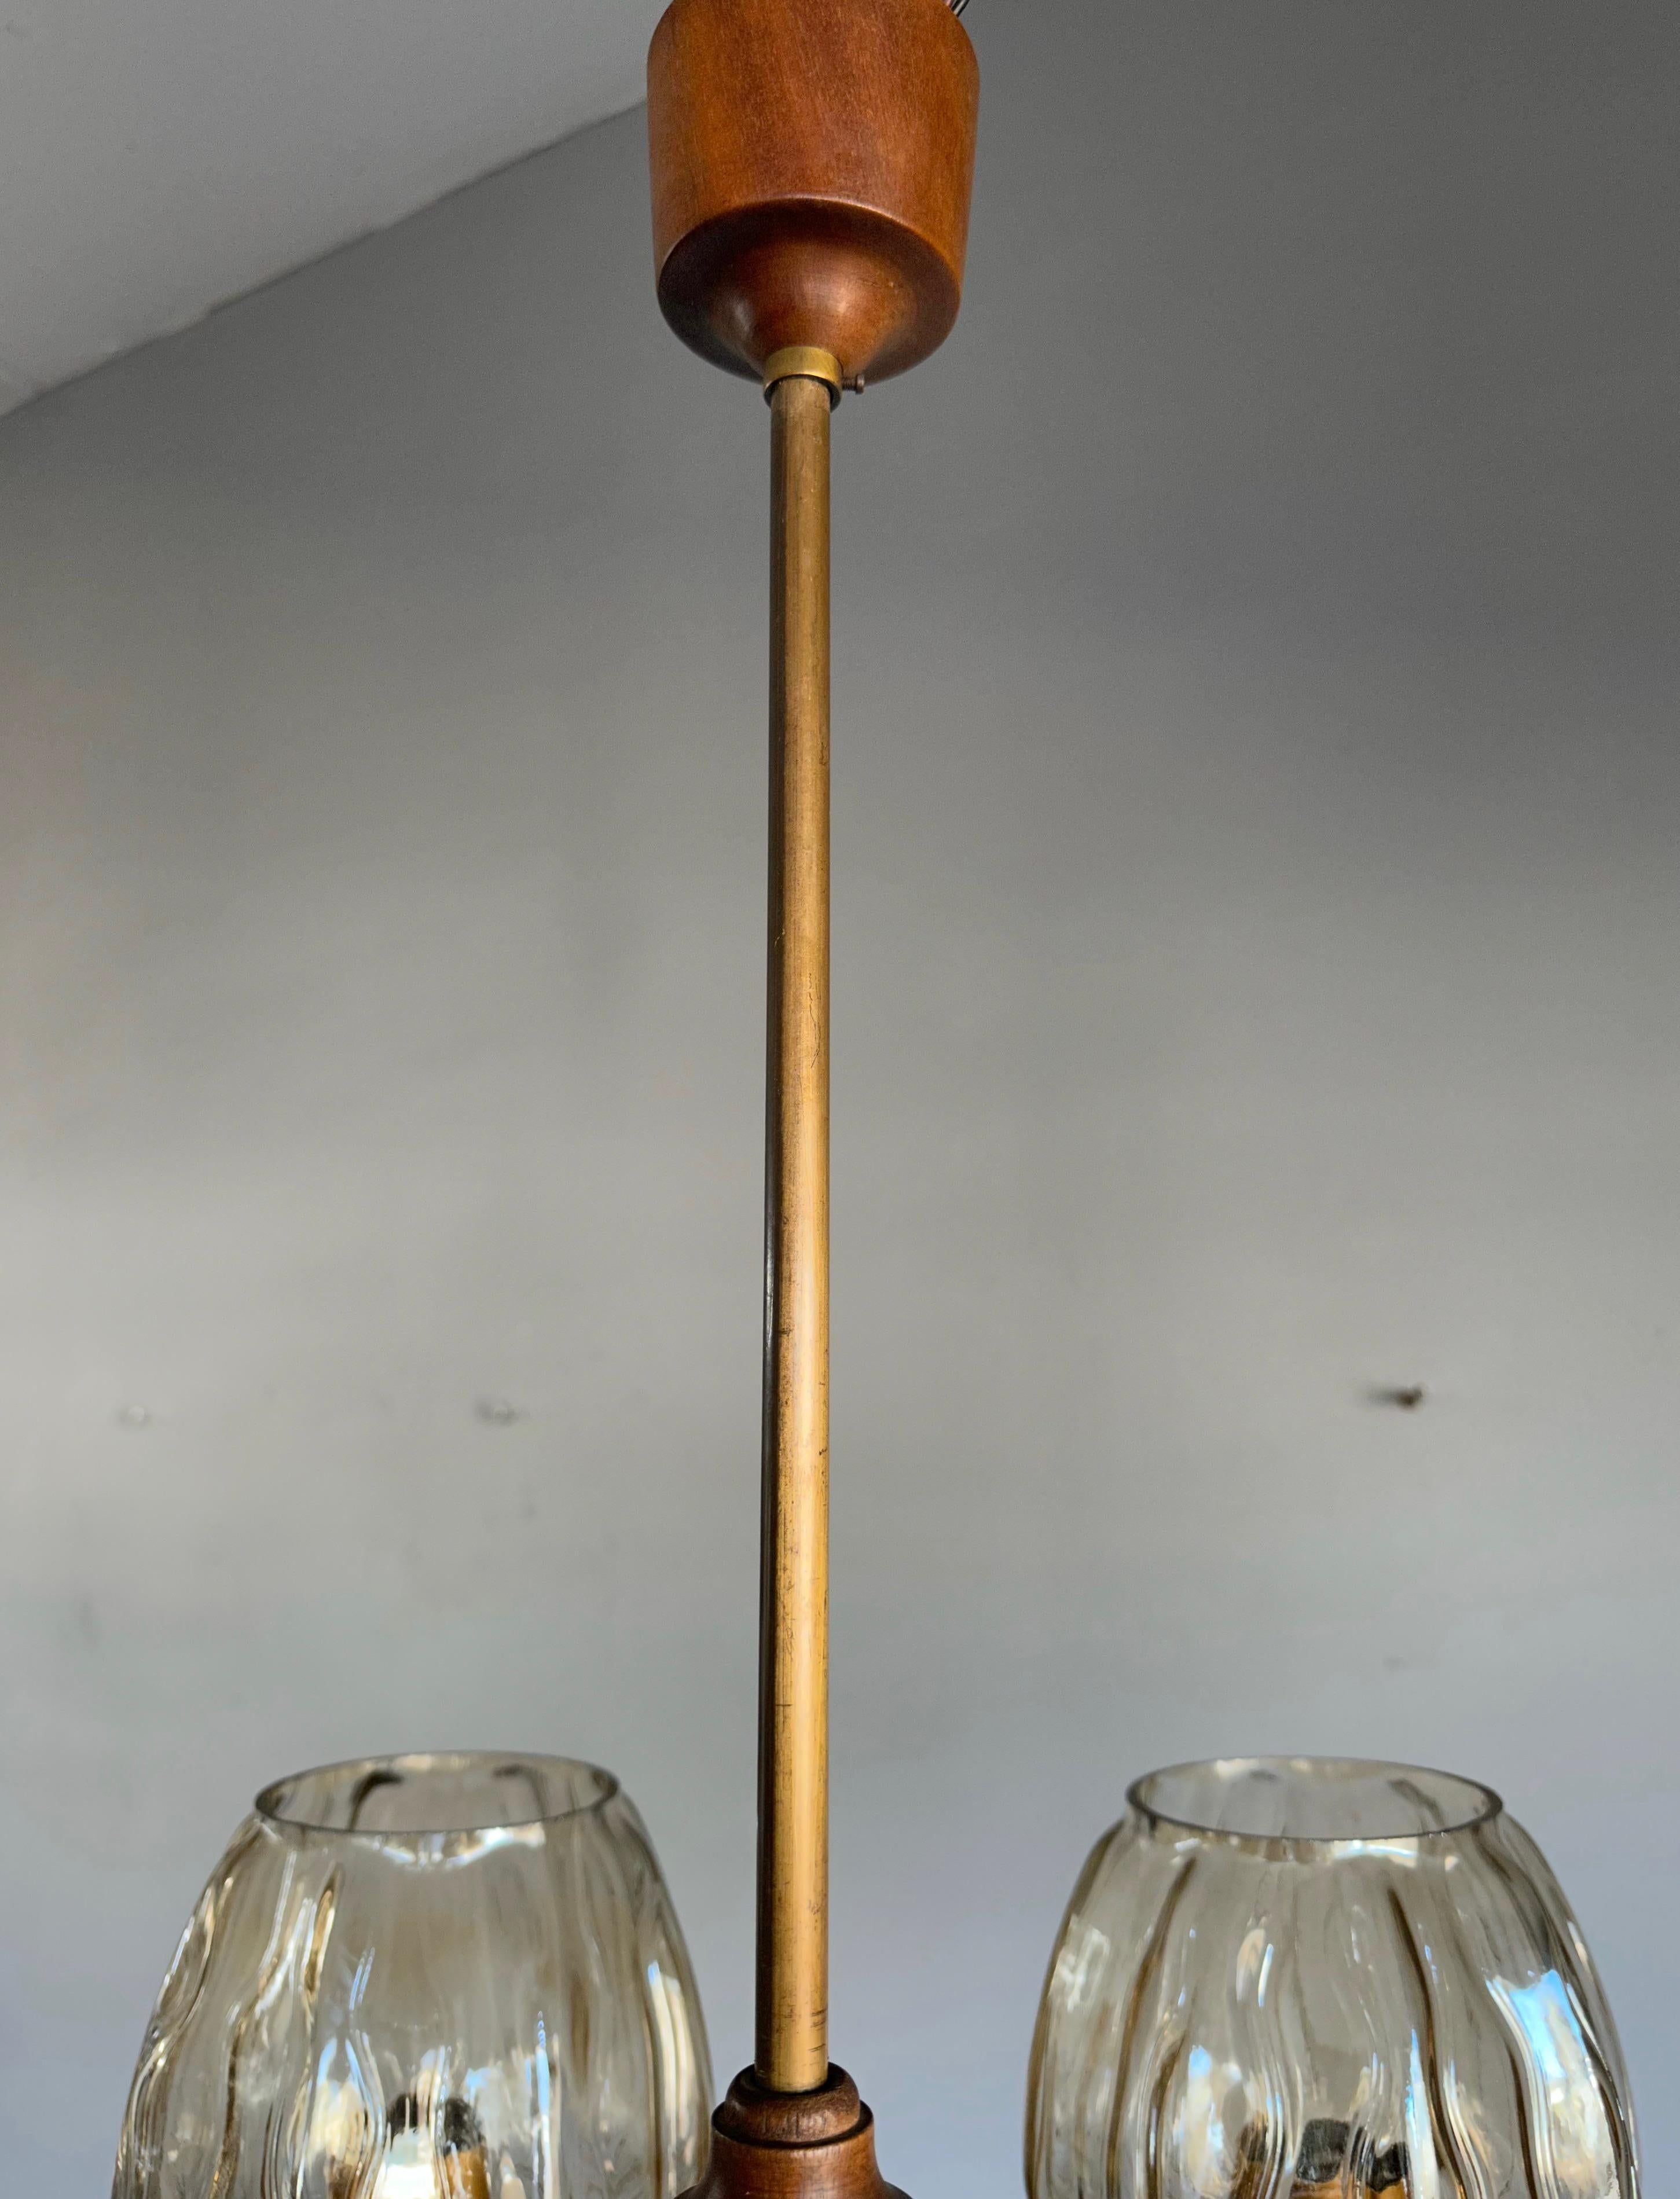 Sophisticated Mid-Century Modern 6 Light Chandelier with Art Glass Shades 1960s For Sale 8